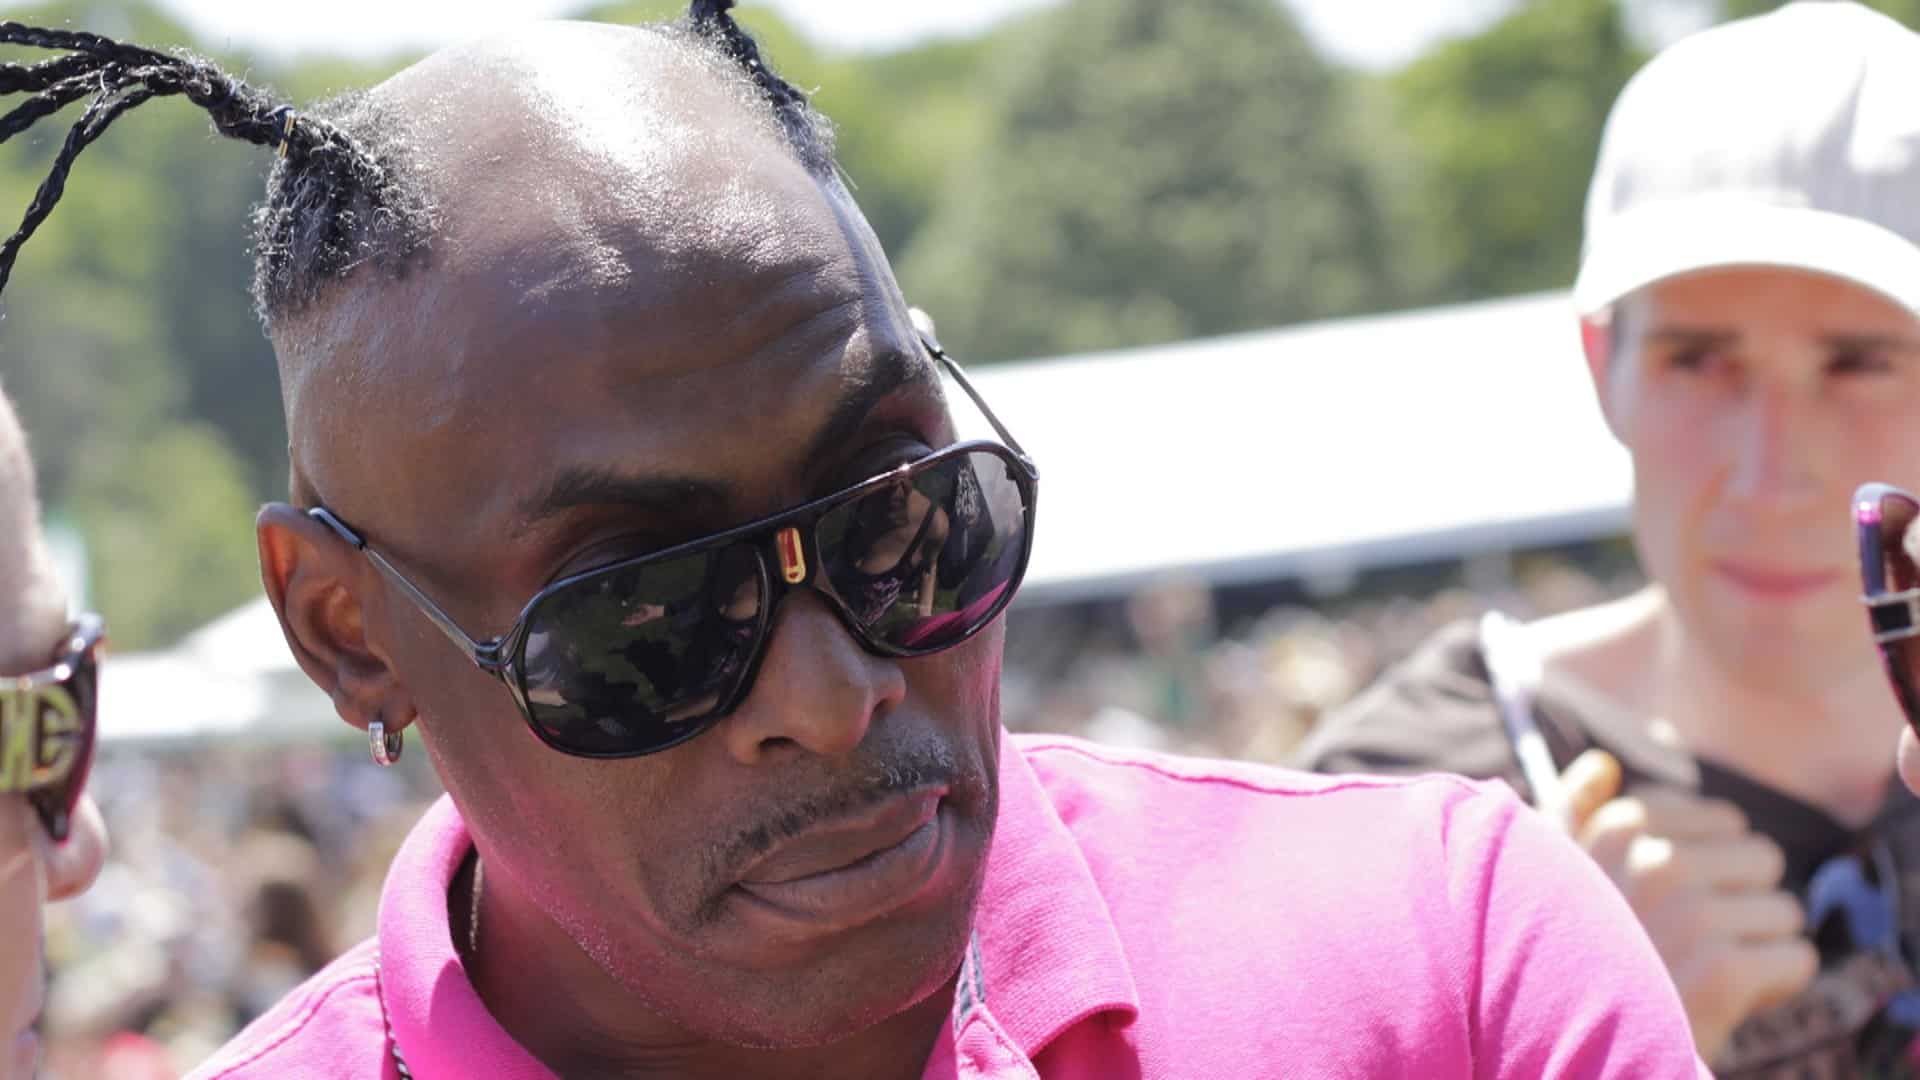 Coolio posthumous album ‘Long Live Coolio’  to be released later this year